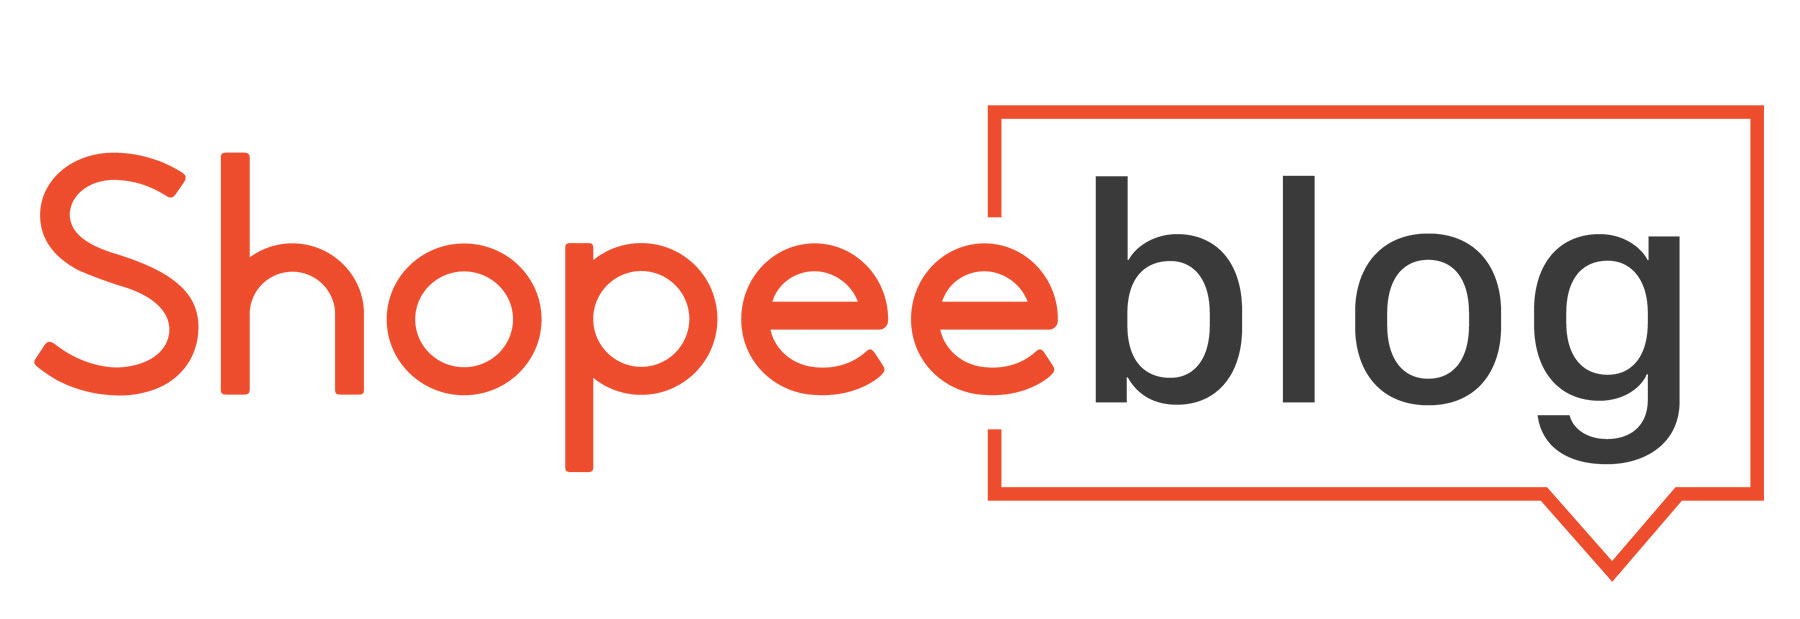 Shopee PH Blog | Shop Online at Best Prices, Promo Codes, Online Reviews, & More - Shopee PH's Official Blog